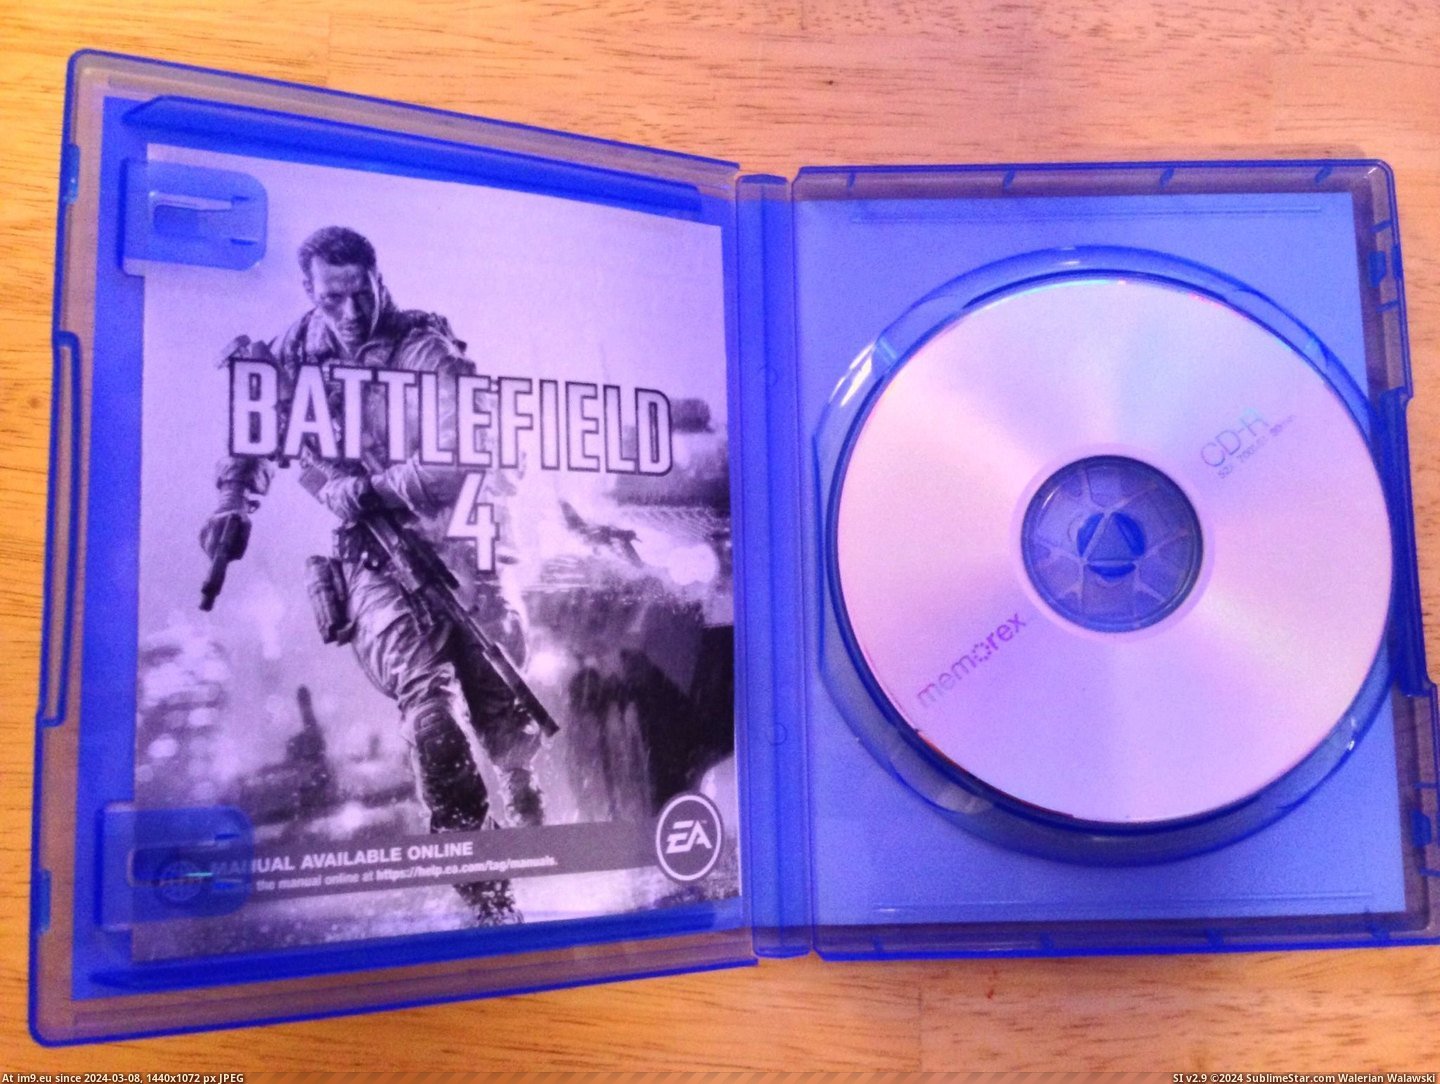 #Gaming #For #Was #Walmart #Ps4 #Battlefield #Fuck #How #Bought [Gaming] Bought Battlefield 4 for PS4 from Walmart, this was inside. How the fuck is this possible? Pic. (Bild von album My r/GAMING favs))